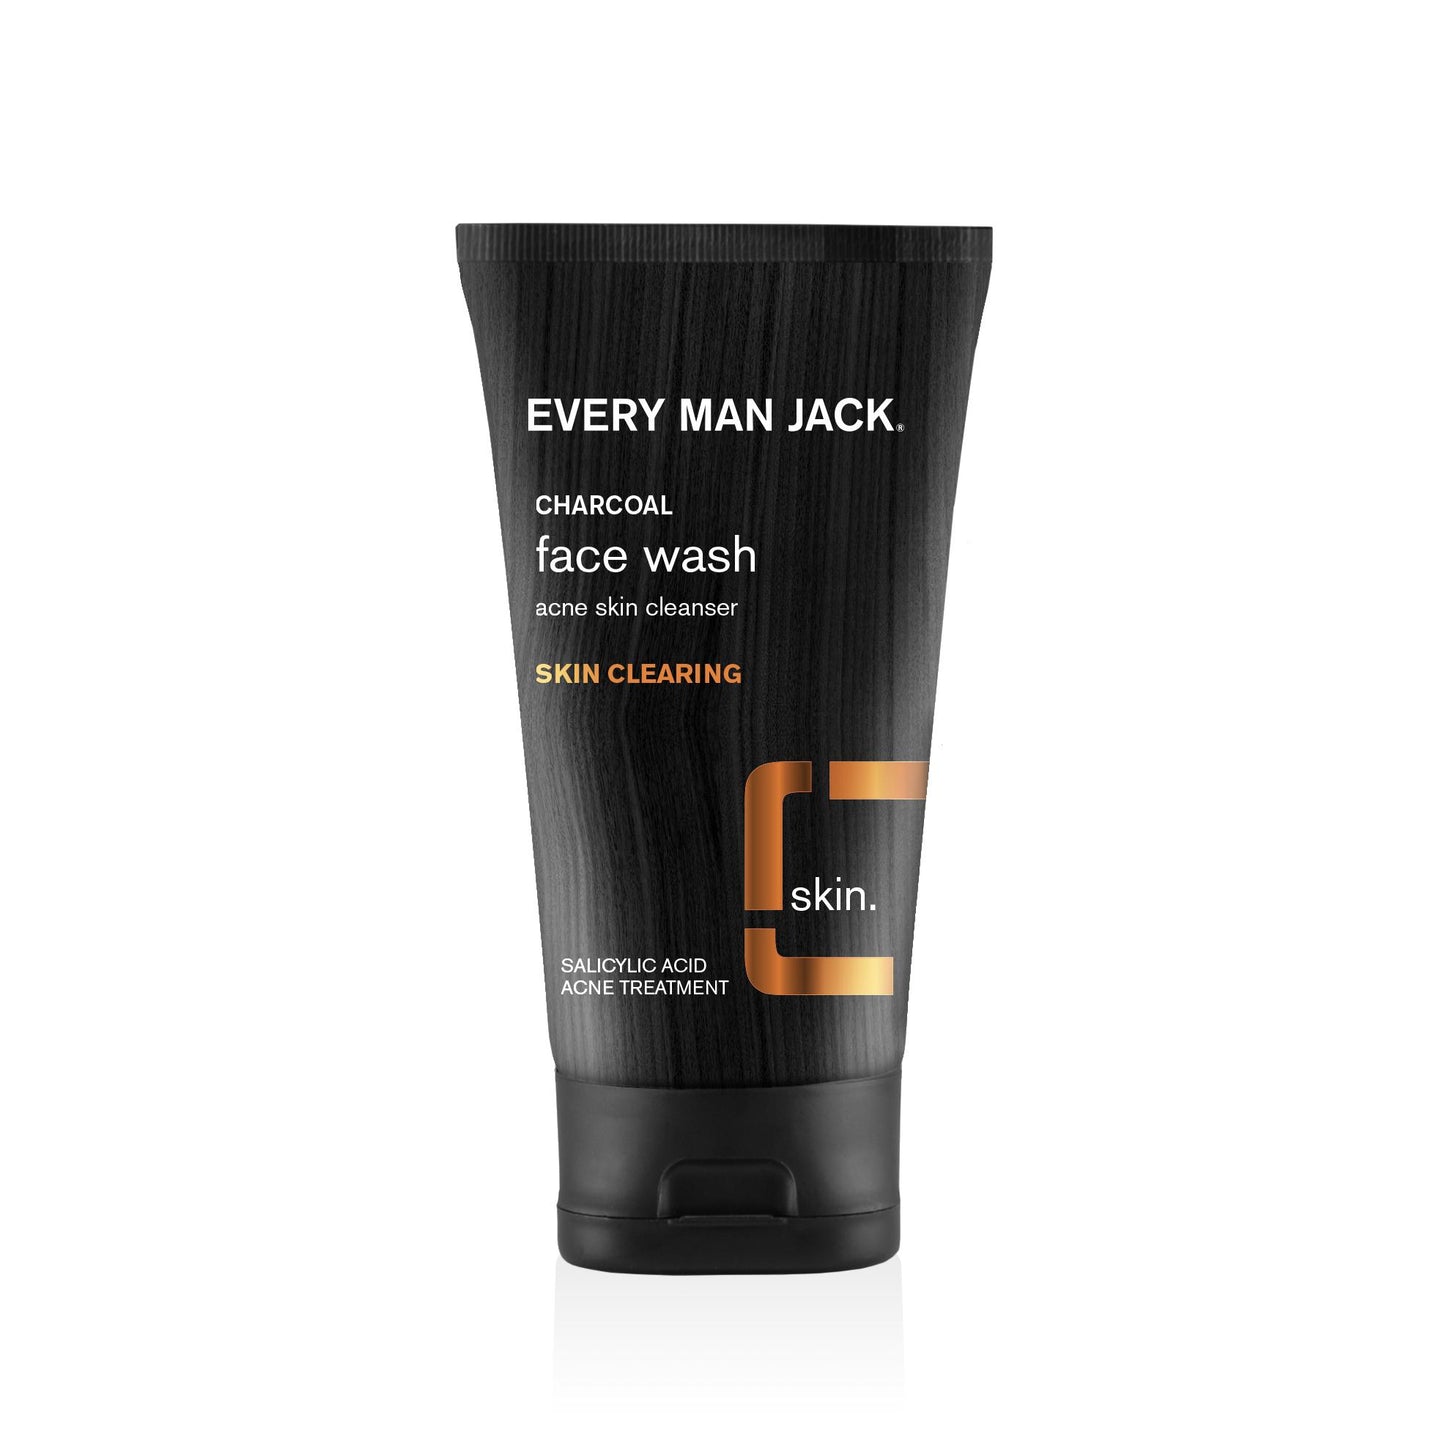 Every Man Jack Skin Clearing Charcoal Facial Wash 147ml